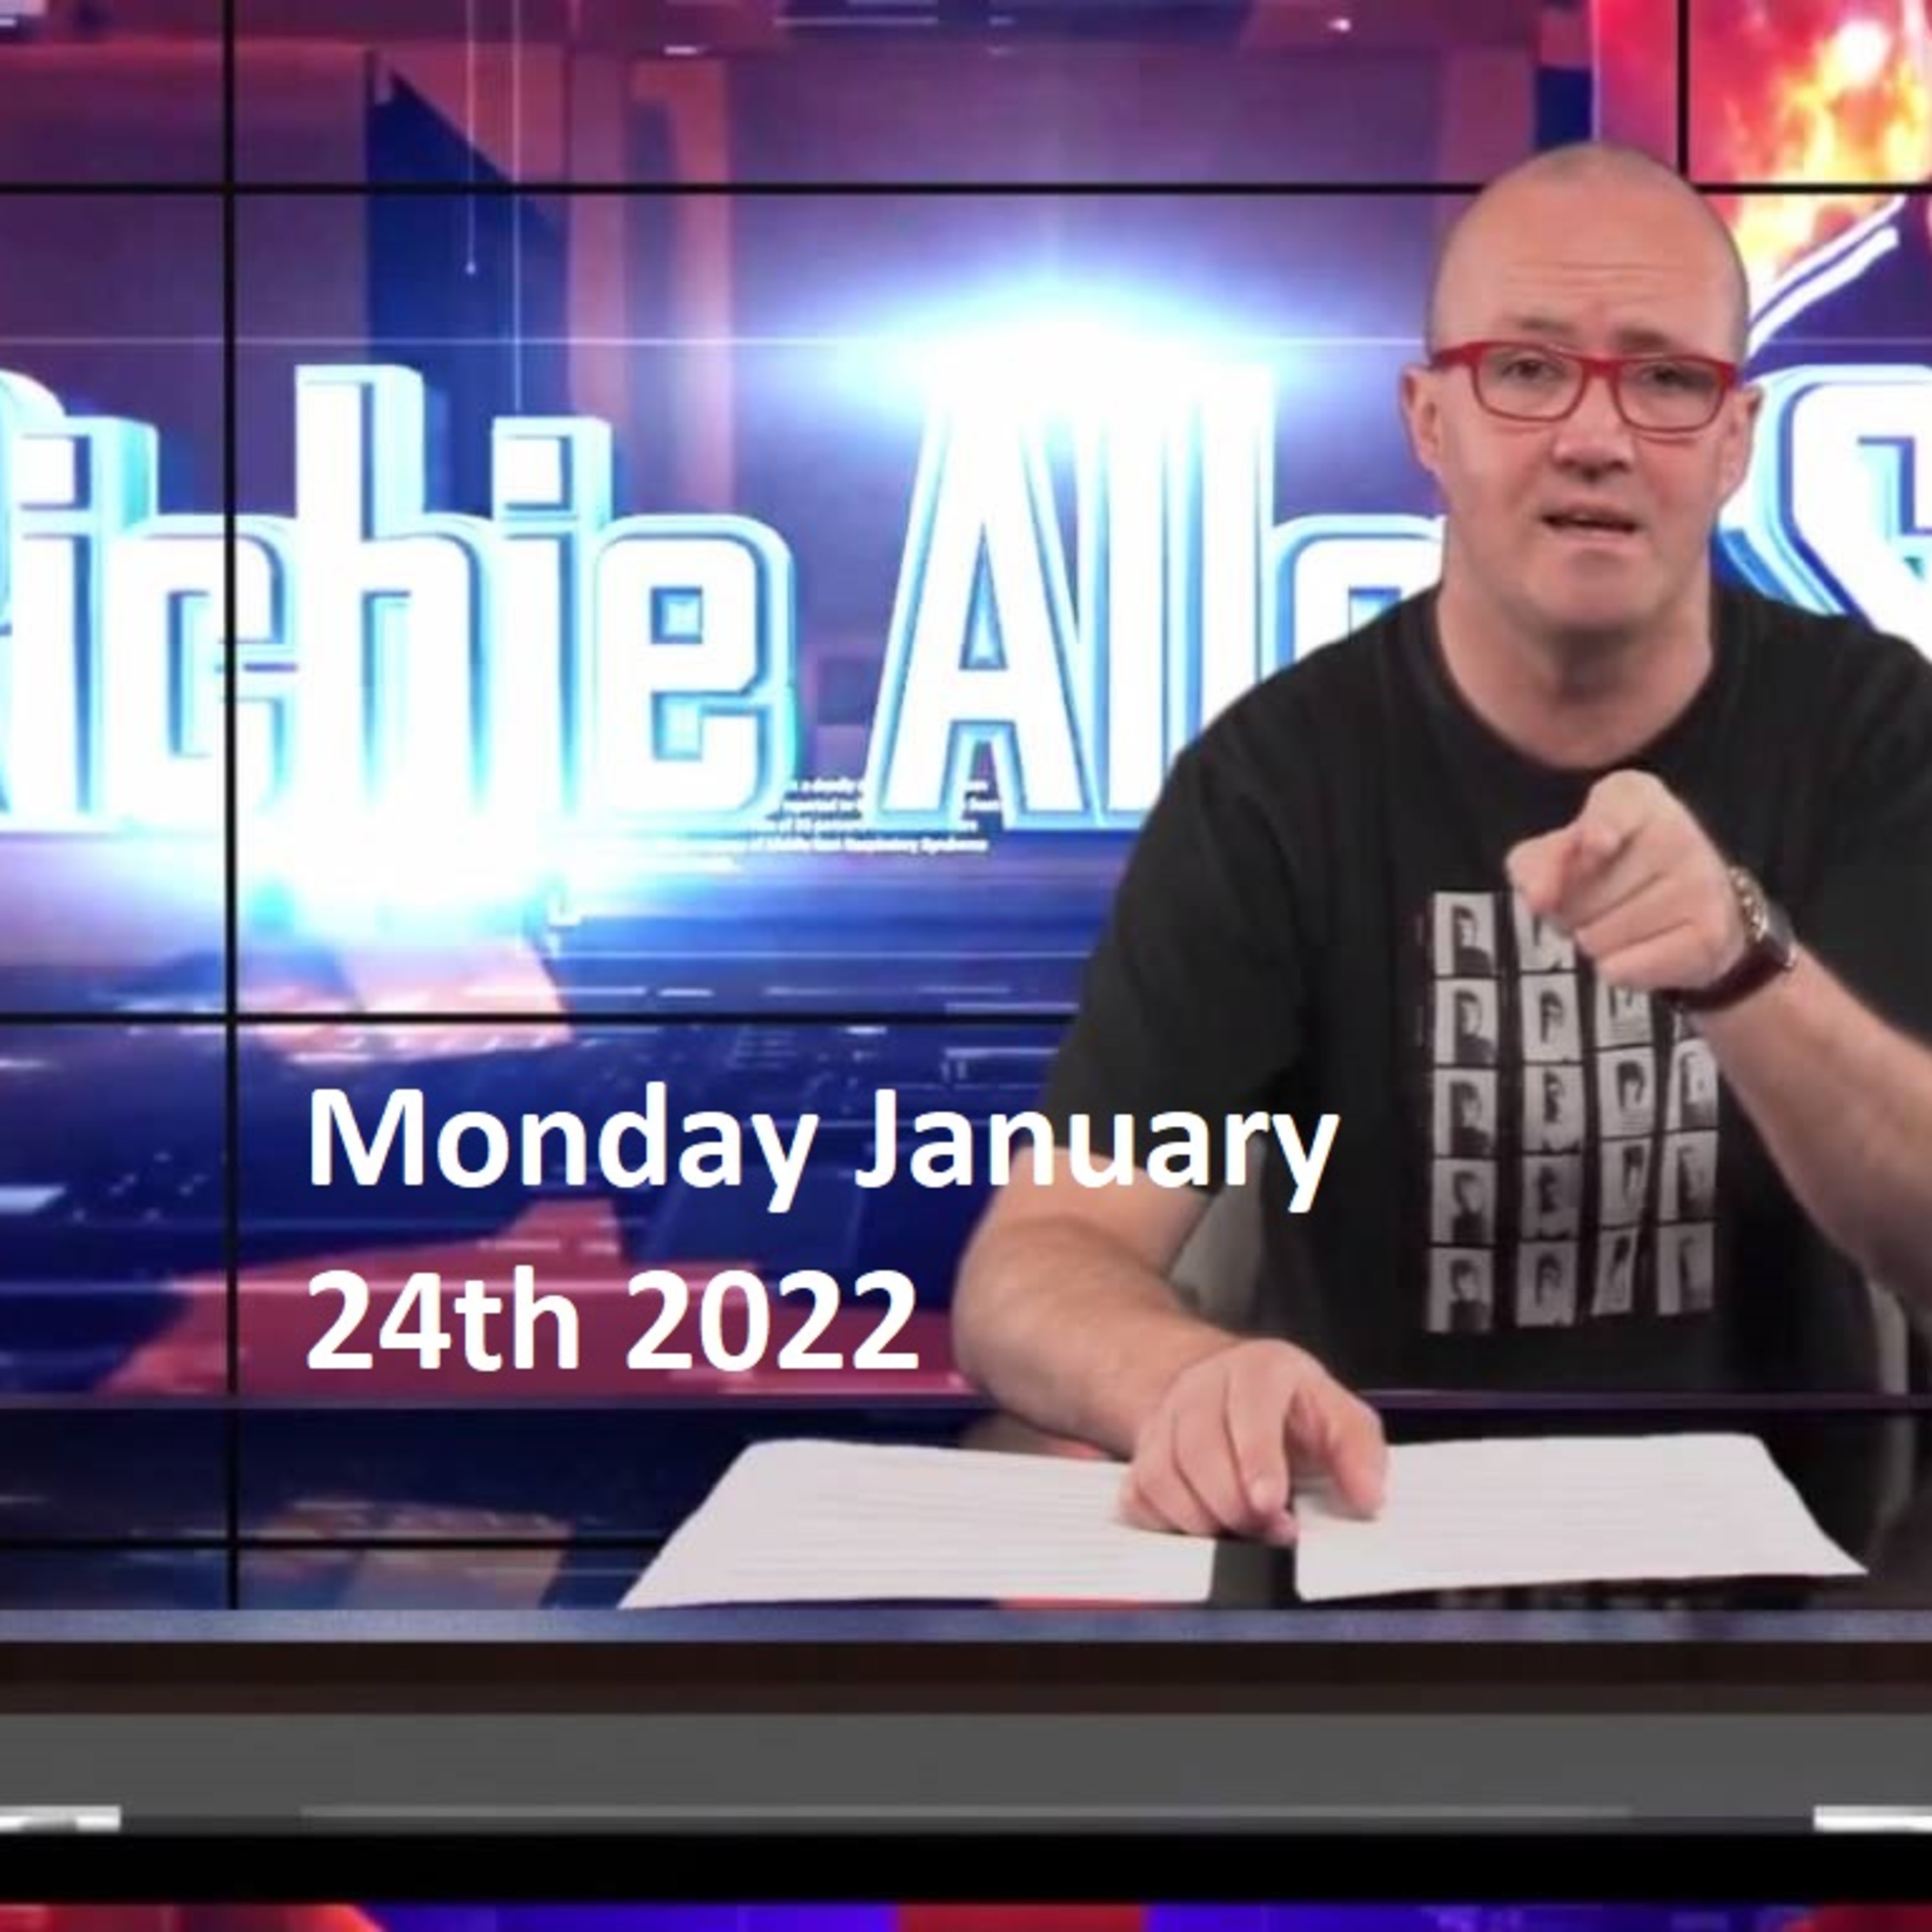 Episode 1394: The Richie Allen Show Monday January 24th 2022